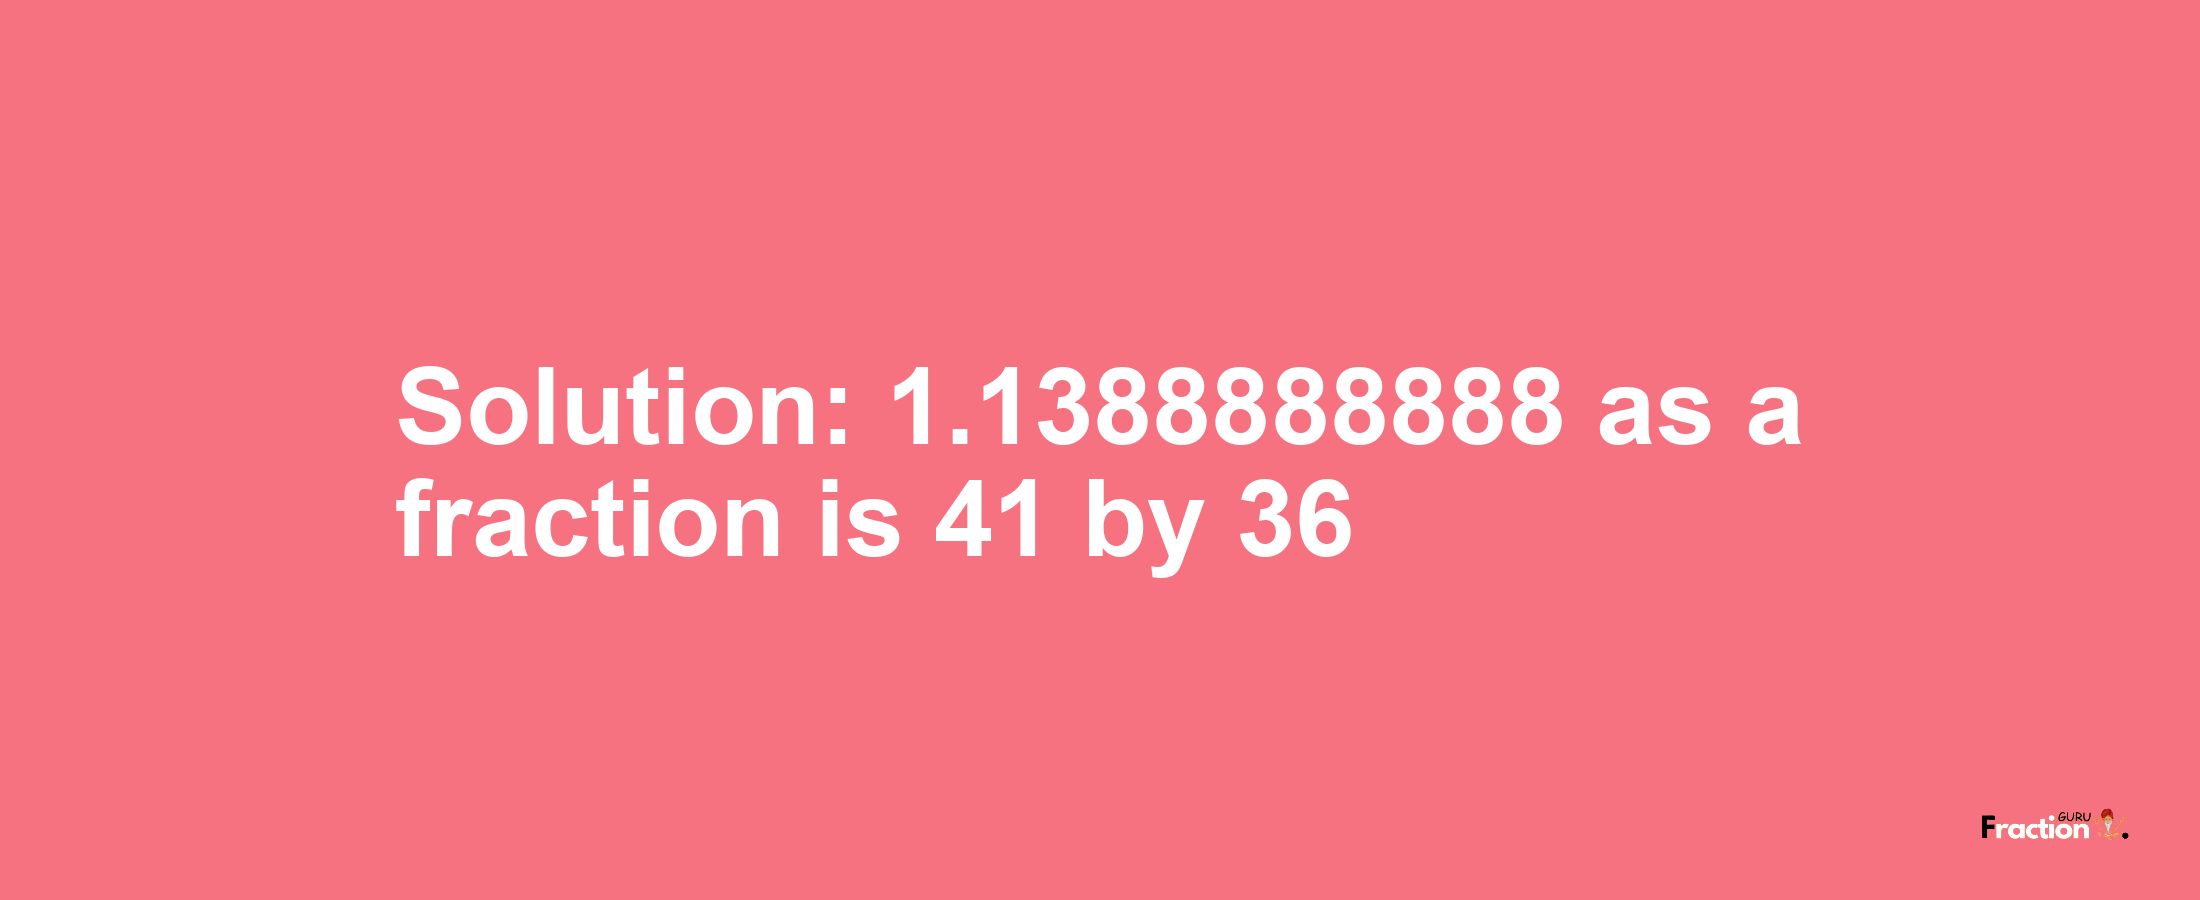 Solution:1.1388888888 as a fraction is 41/36